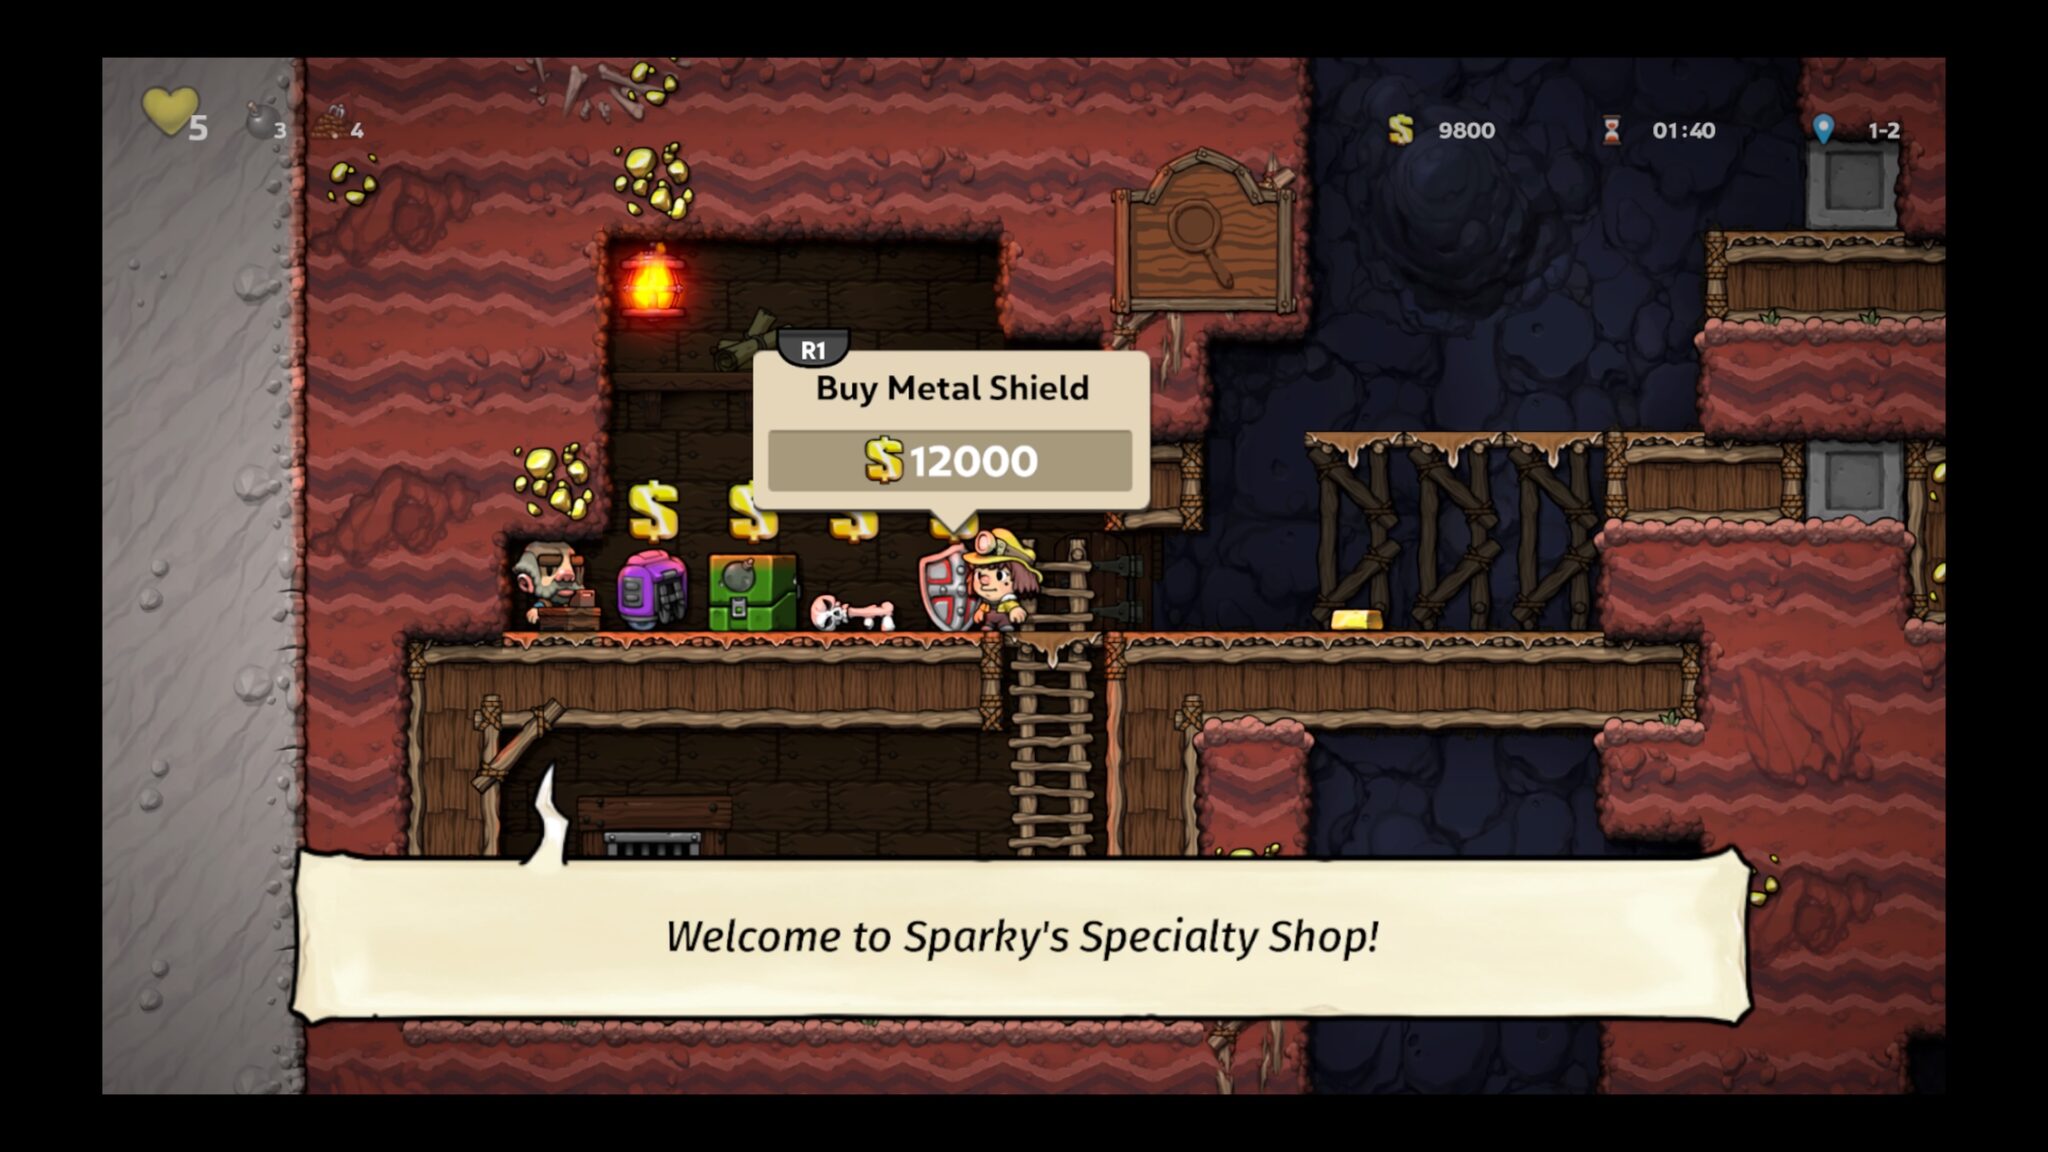 Spelunky 2 Use This Incredibly Easy Method To Take Out The Shopkeeper And Steal All His Stuff